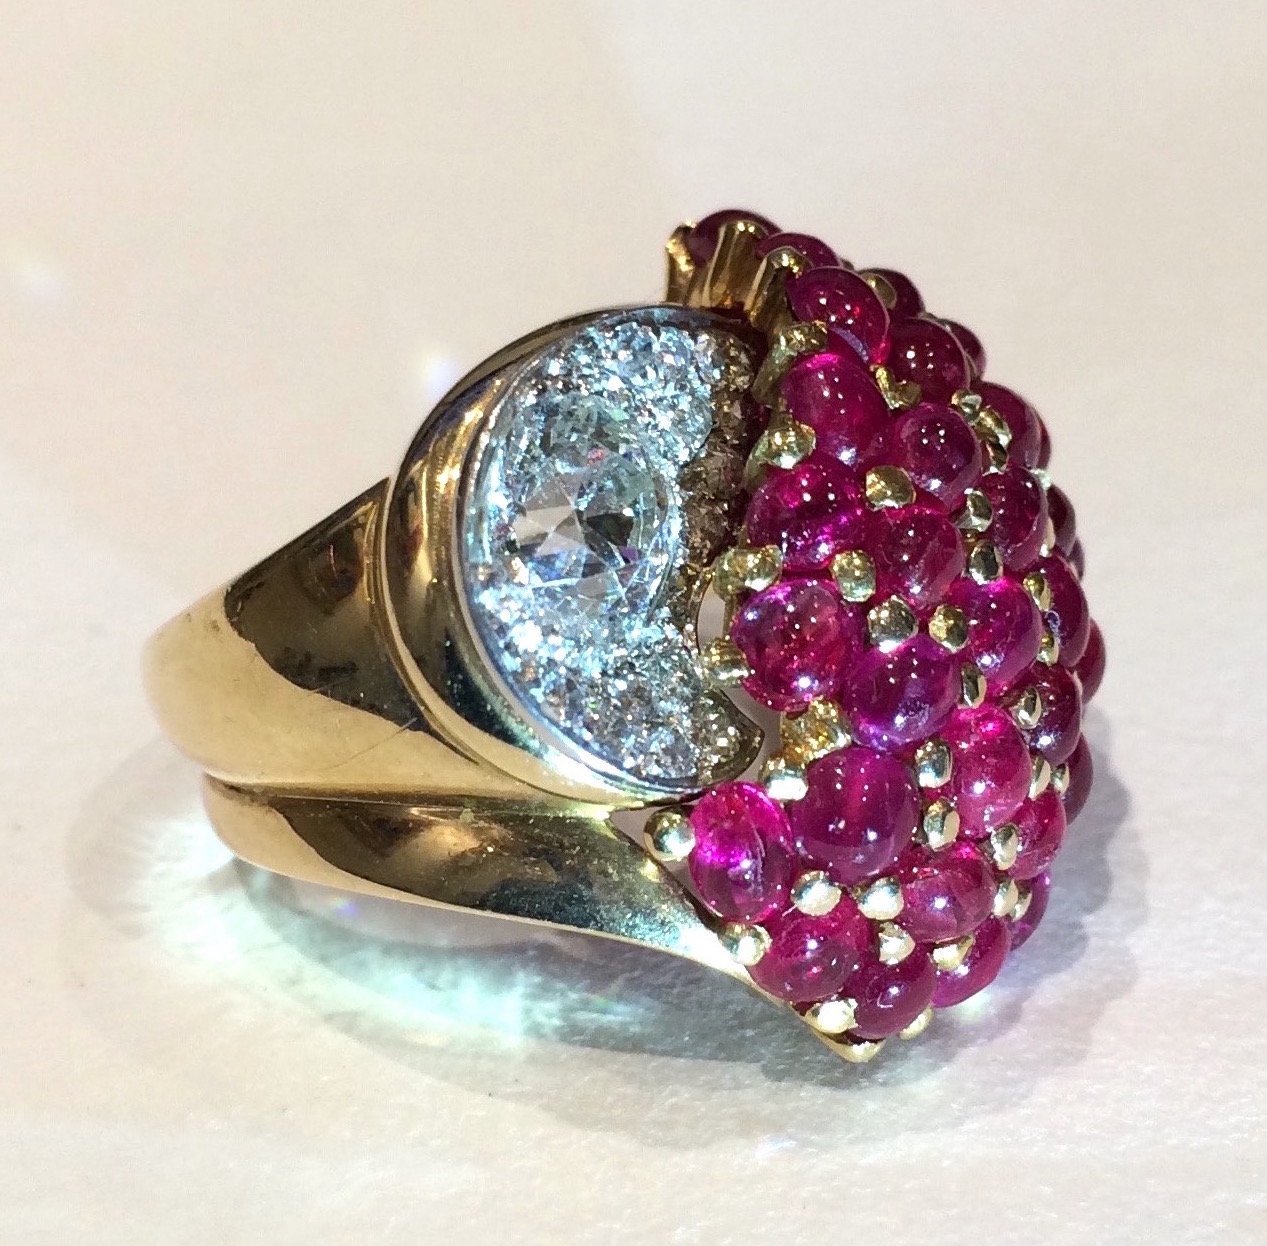 Paul Flato, (1900-1999) Hollywood, New York (attr.) “Cluster” ring in 18K yellow gold and set with 39 cabochon rubies (approx. 8 carats TW) and further set with a center round brilliant cut diamond (1+ carat TW) and an additional 14 round pave set diamonds in platinum, c. 1940